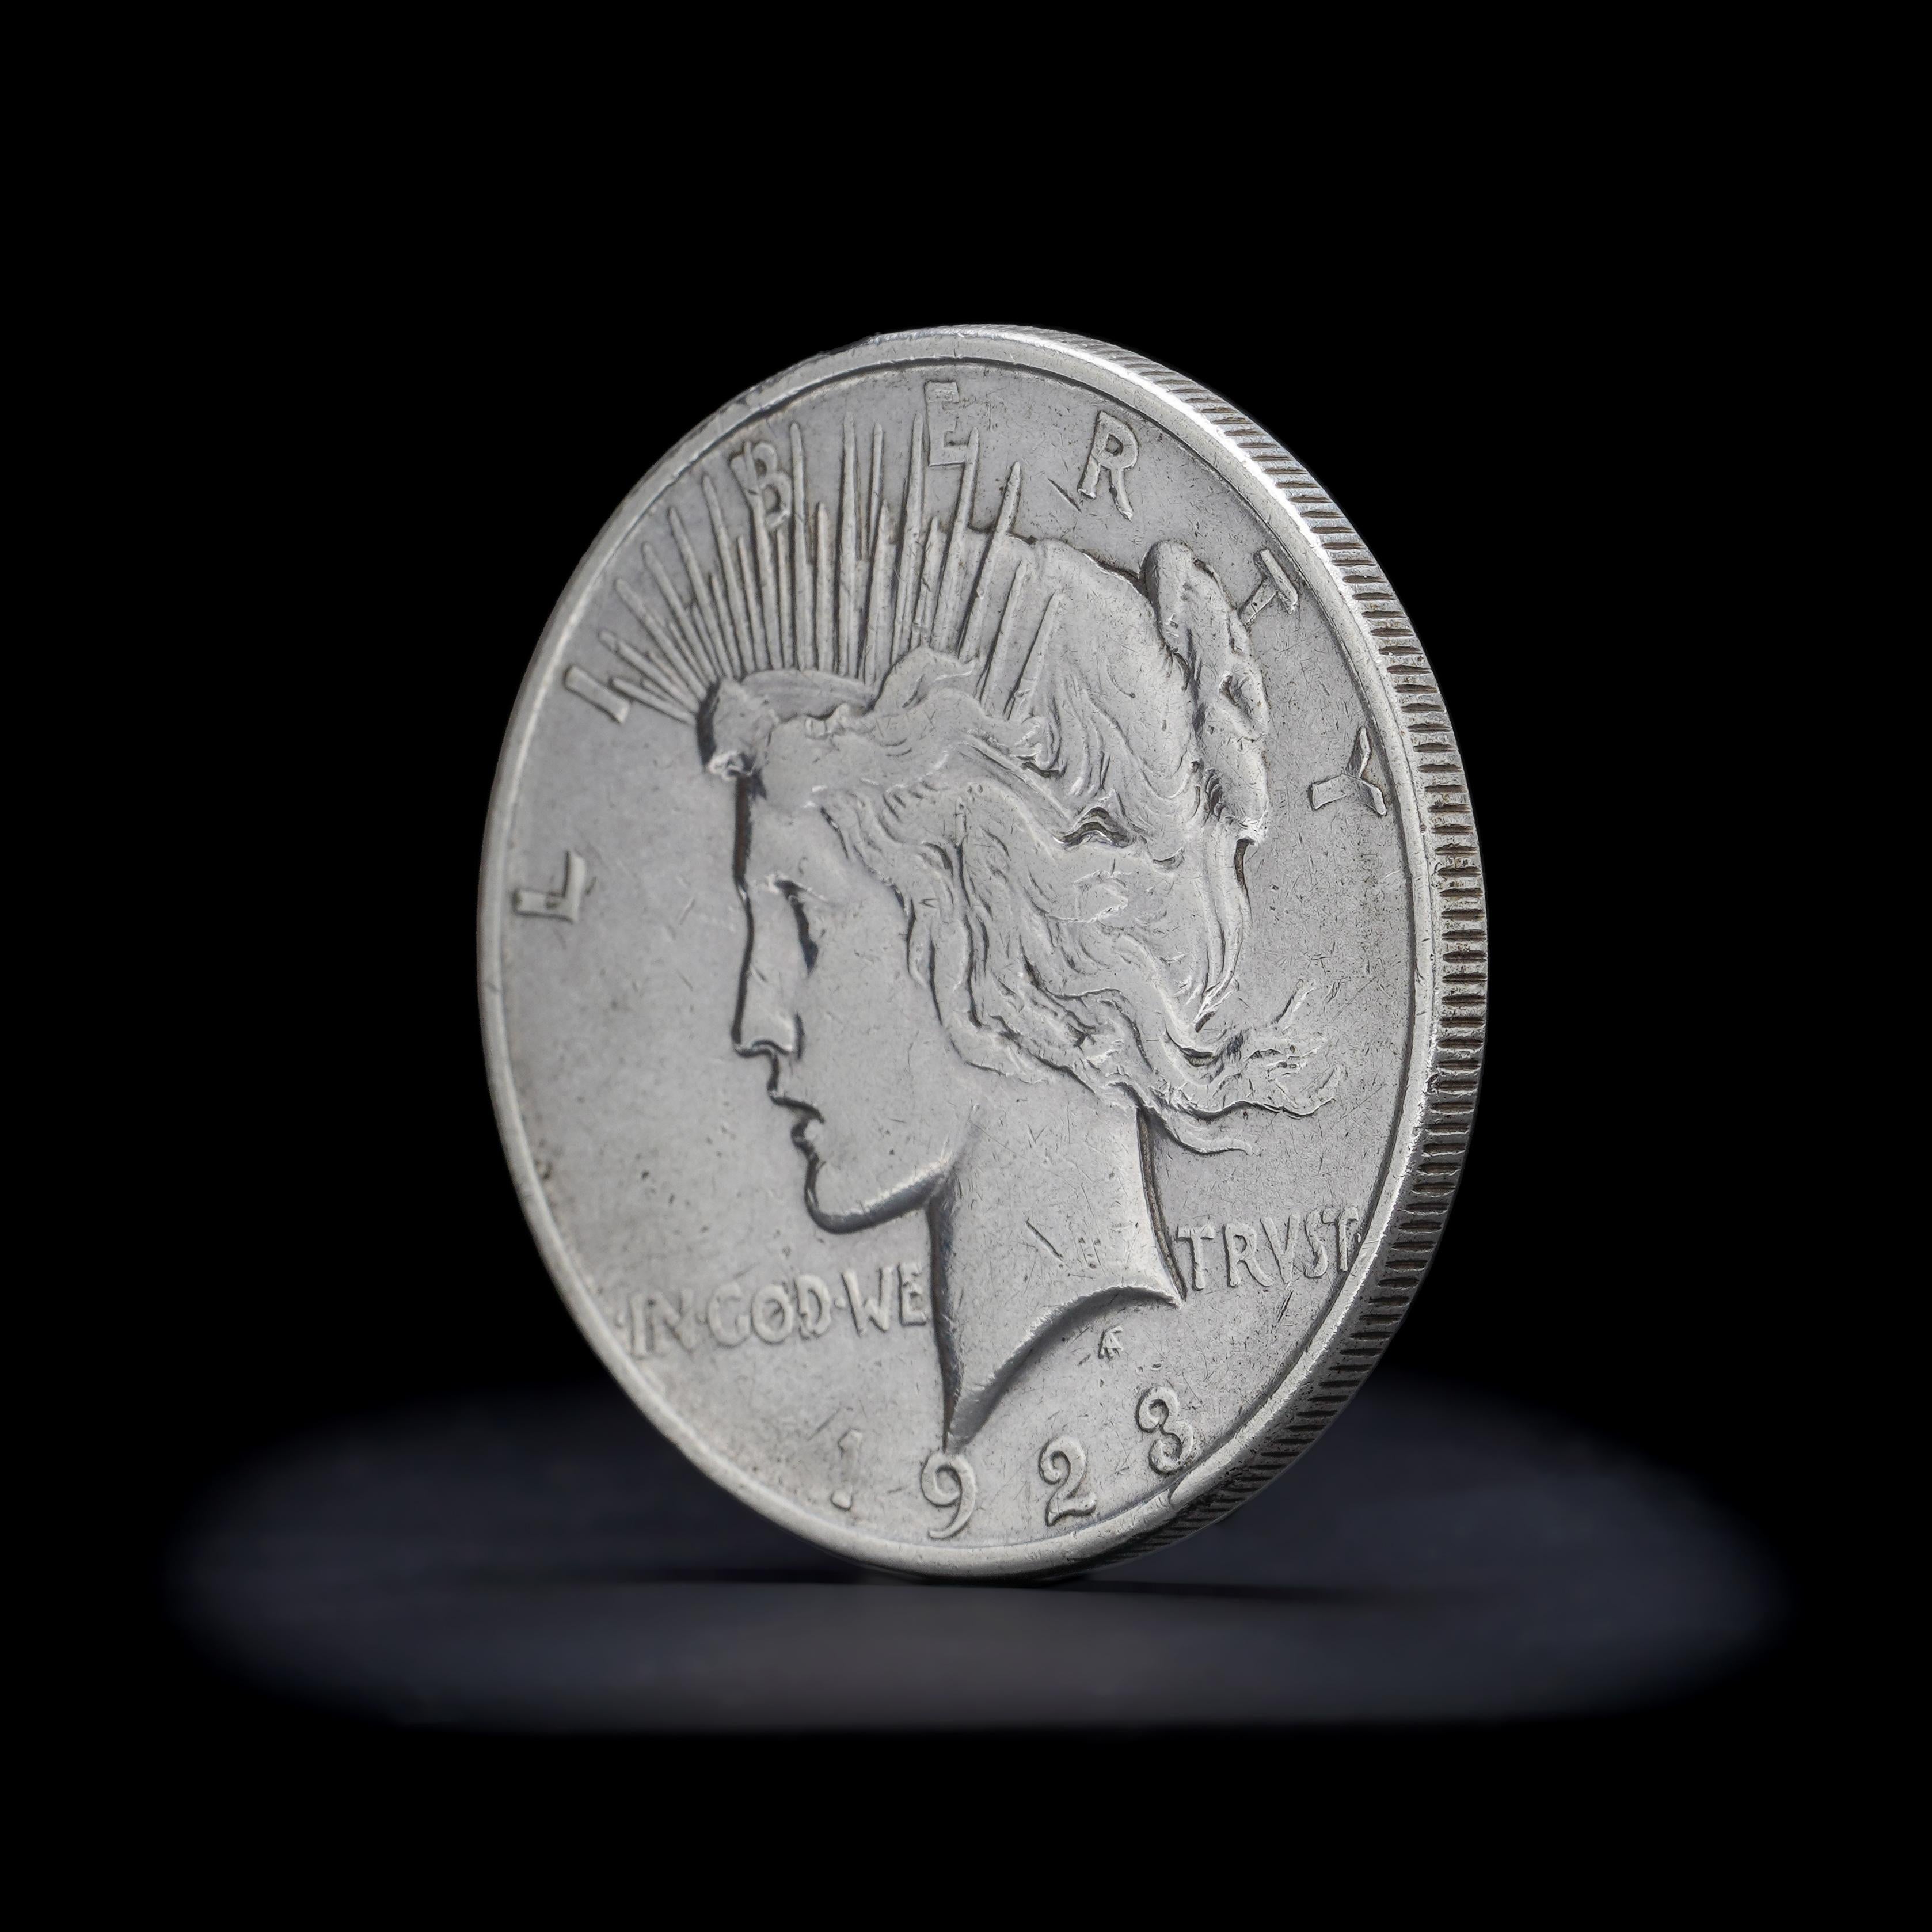 Vintage  1923 Peace Silver Dollar. 
Made in USA, 1923
Mint: Denver
Comes with a silver purity certificate.

The obverse text on the Peace Dollar reads “Liberty; In God We Trvst (Trust); 1923.” The reverse text on the silver dollar reads “United